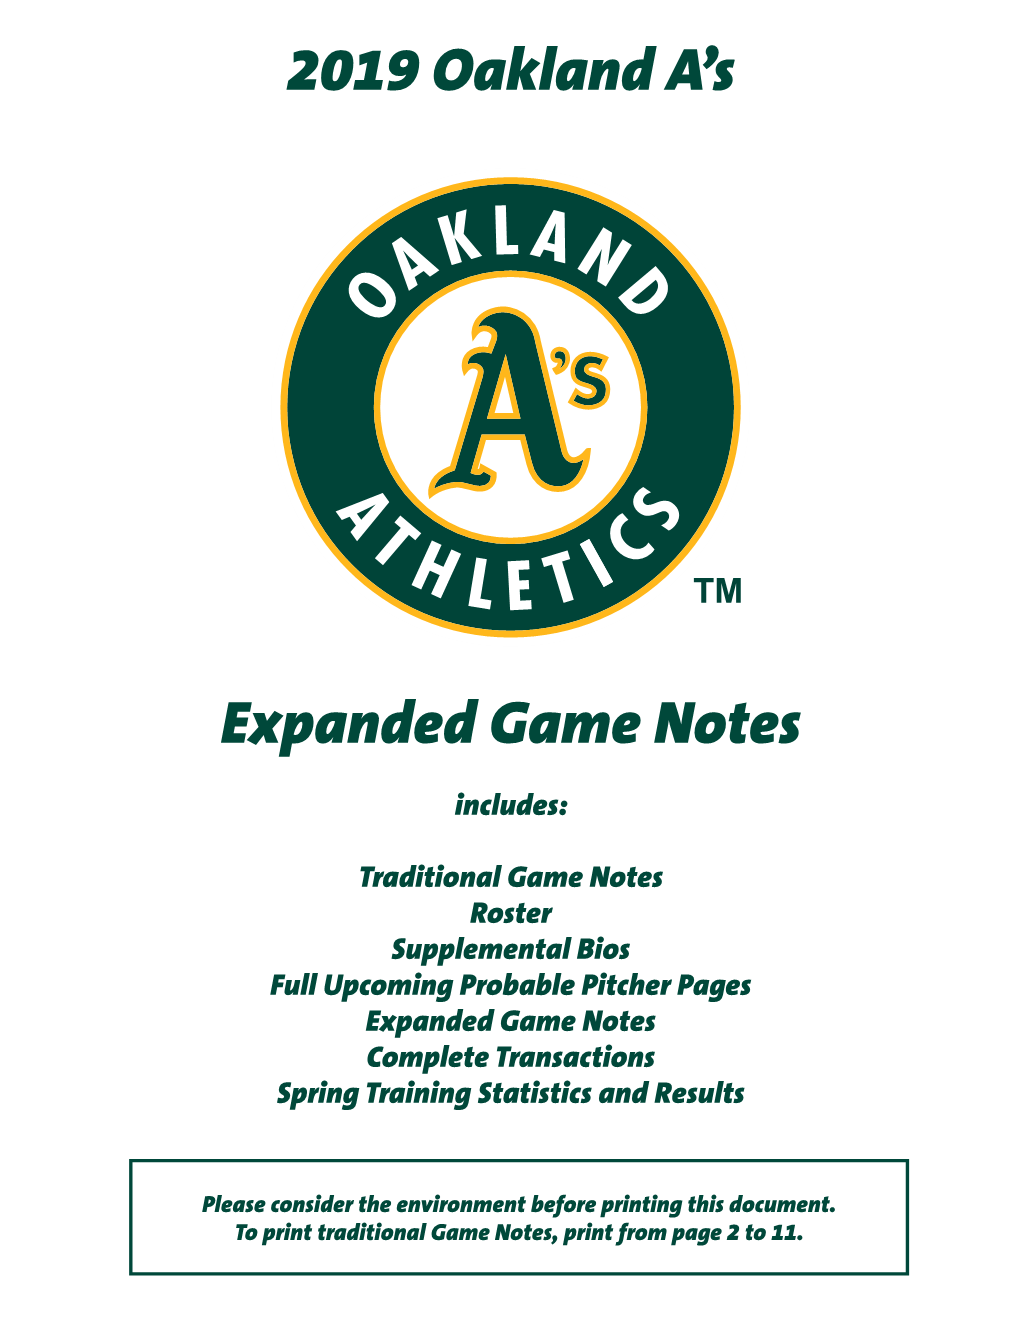 2019 Oakland A's Expanded Game Notes